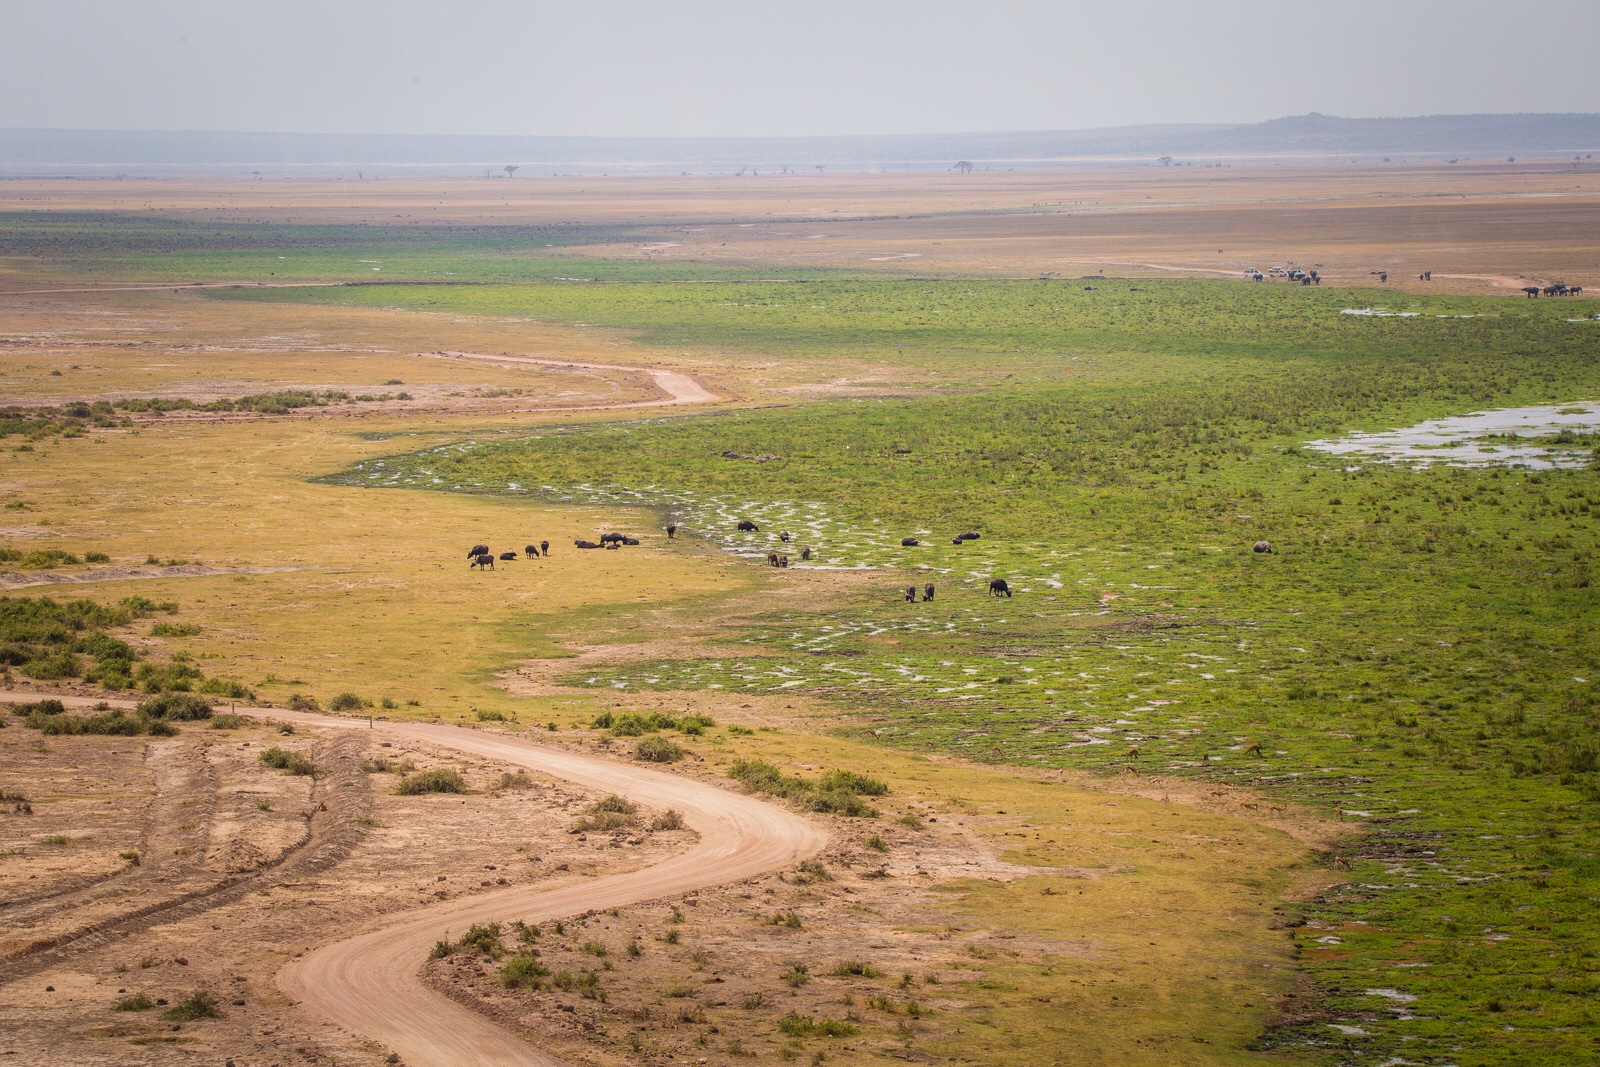 It’s amazing how some areas in Amboseli can be so lush while it’s dry right beside it.